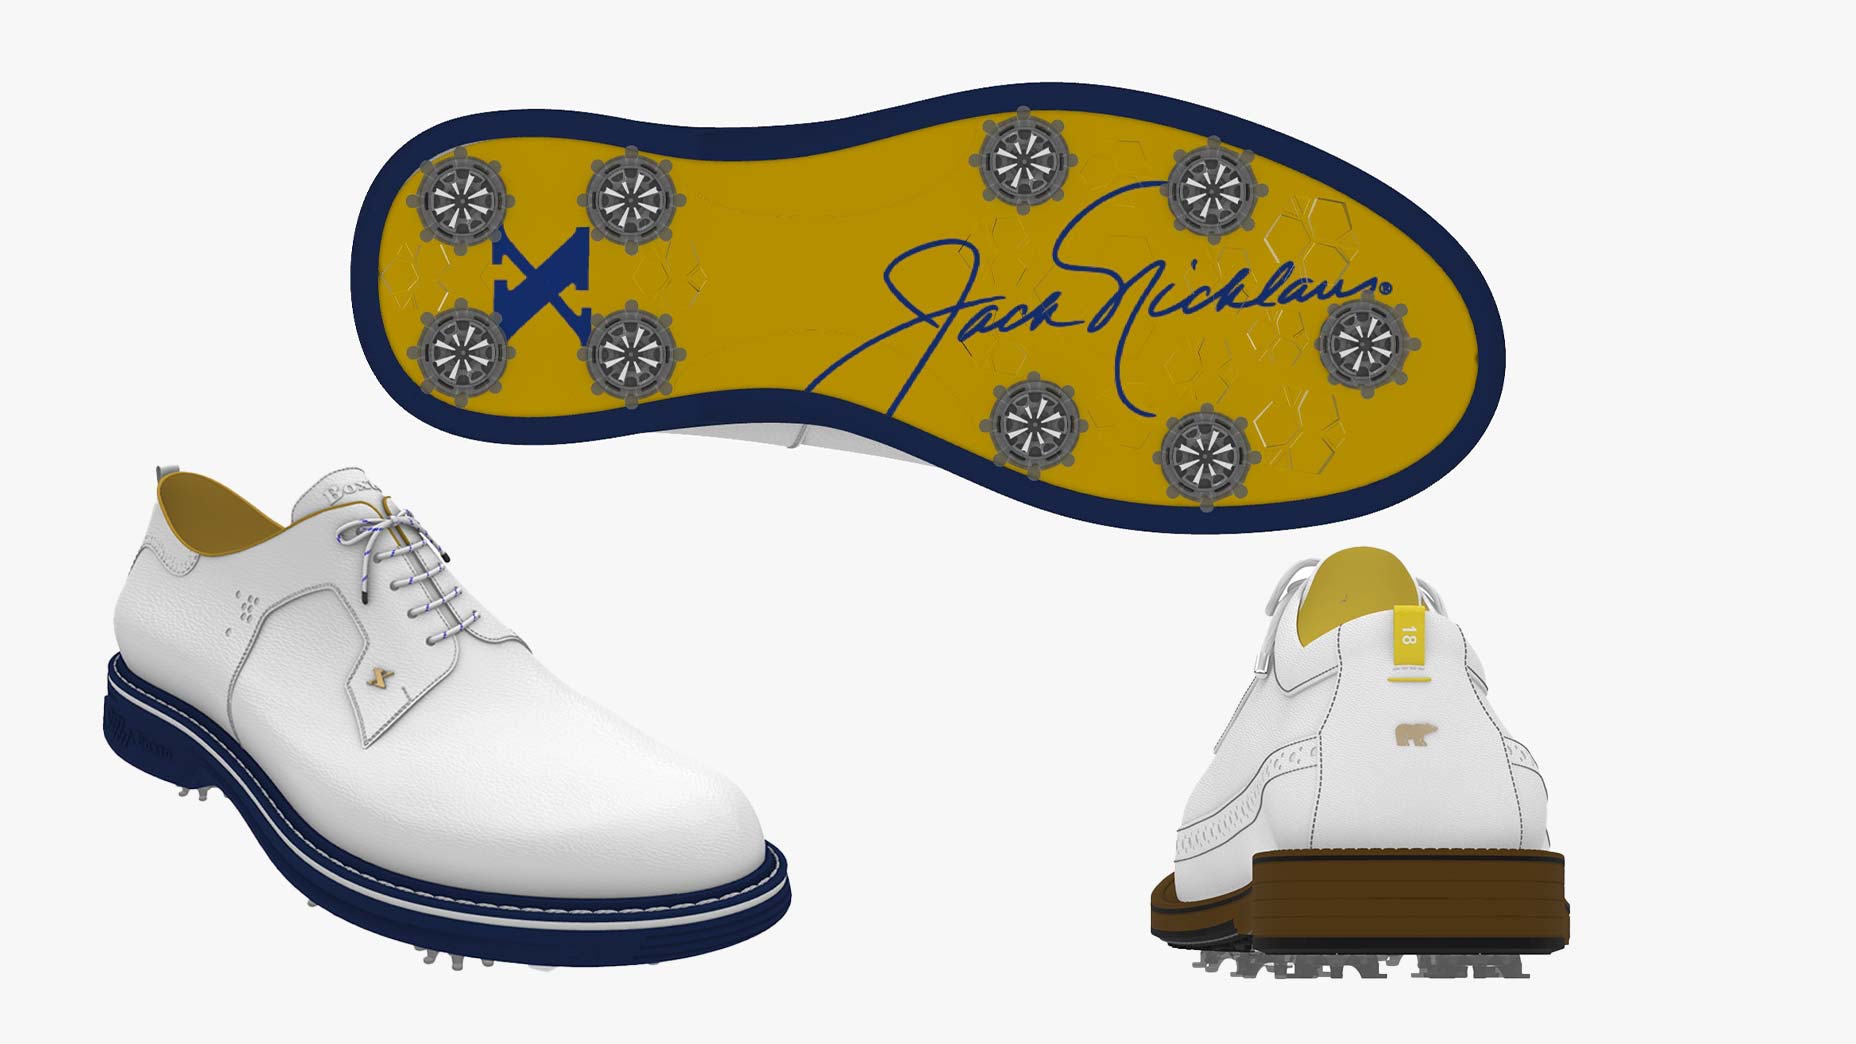 Nicklaus companies and Boxto are collaborating on two new Nicklaus-branded shoe models.